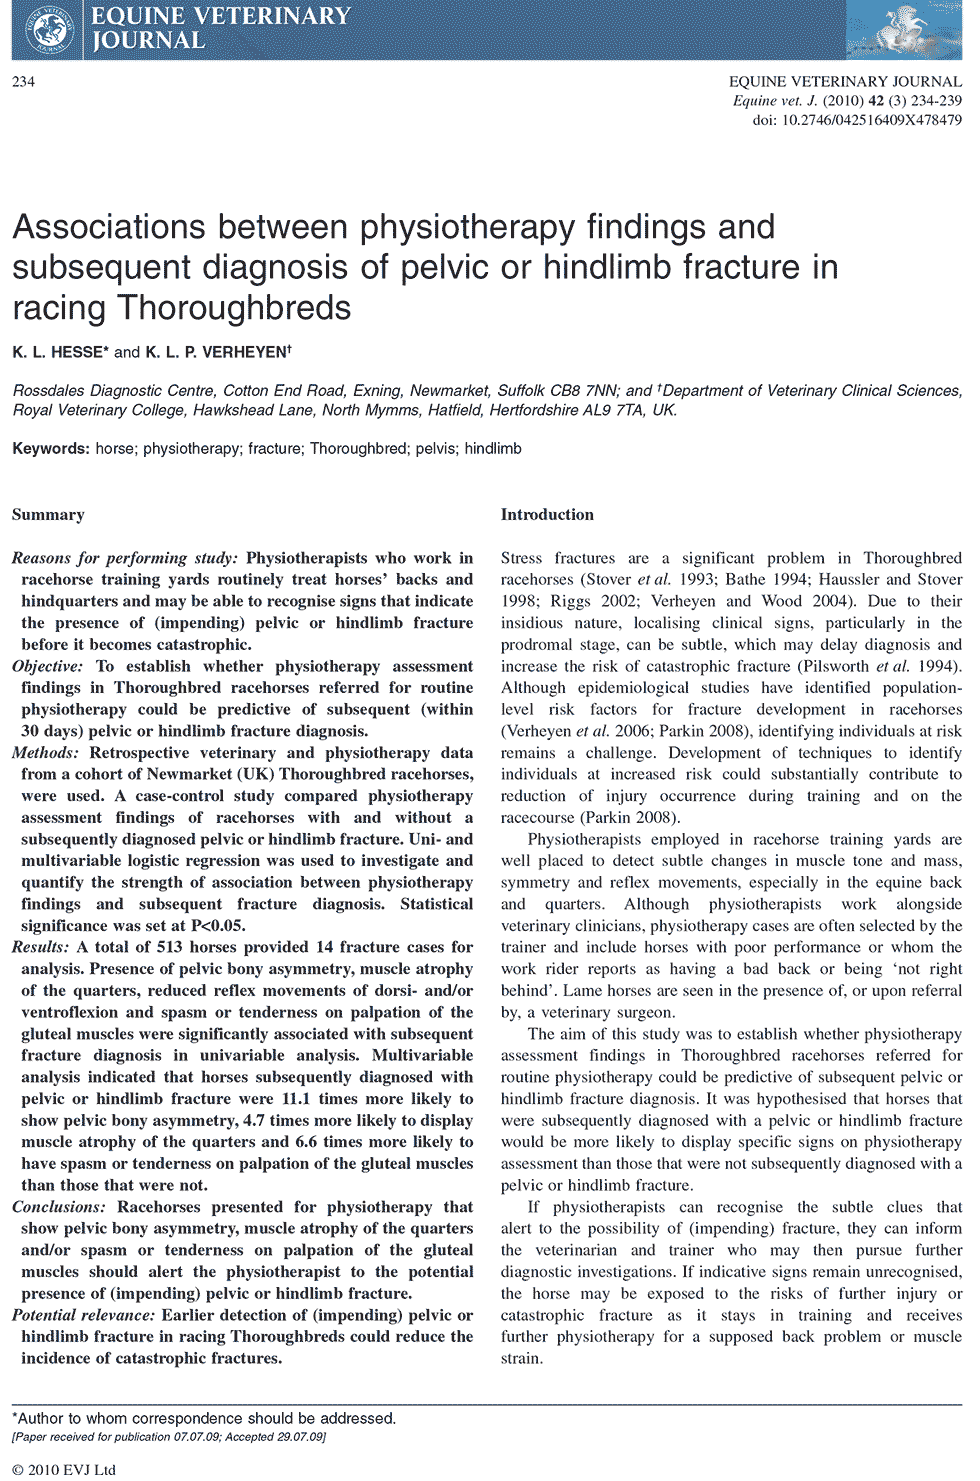 Associations between physiotherapy findings and subsequent diagnosis of pelvic or hindlimb fracture in racing Thoroughbreds